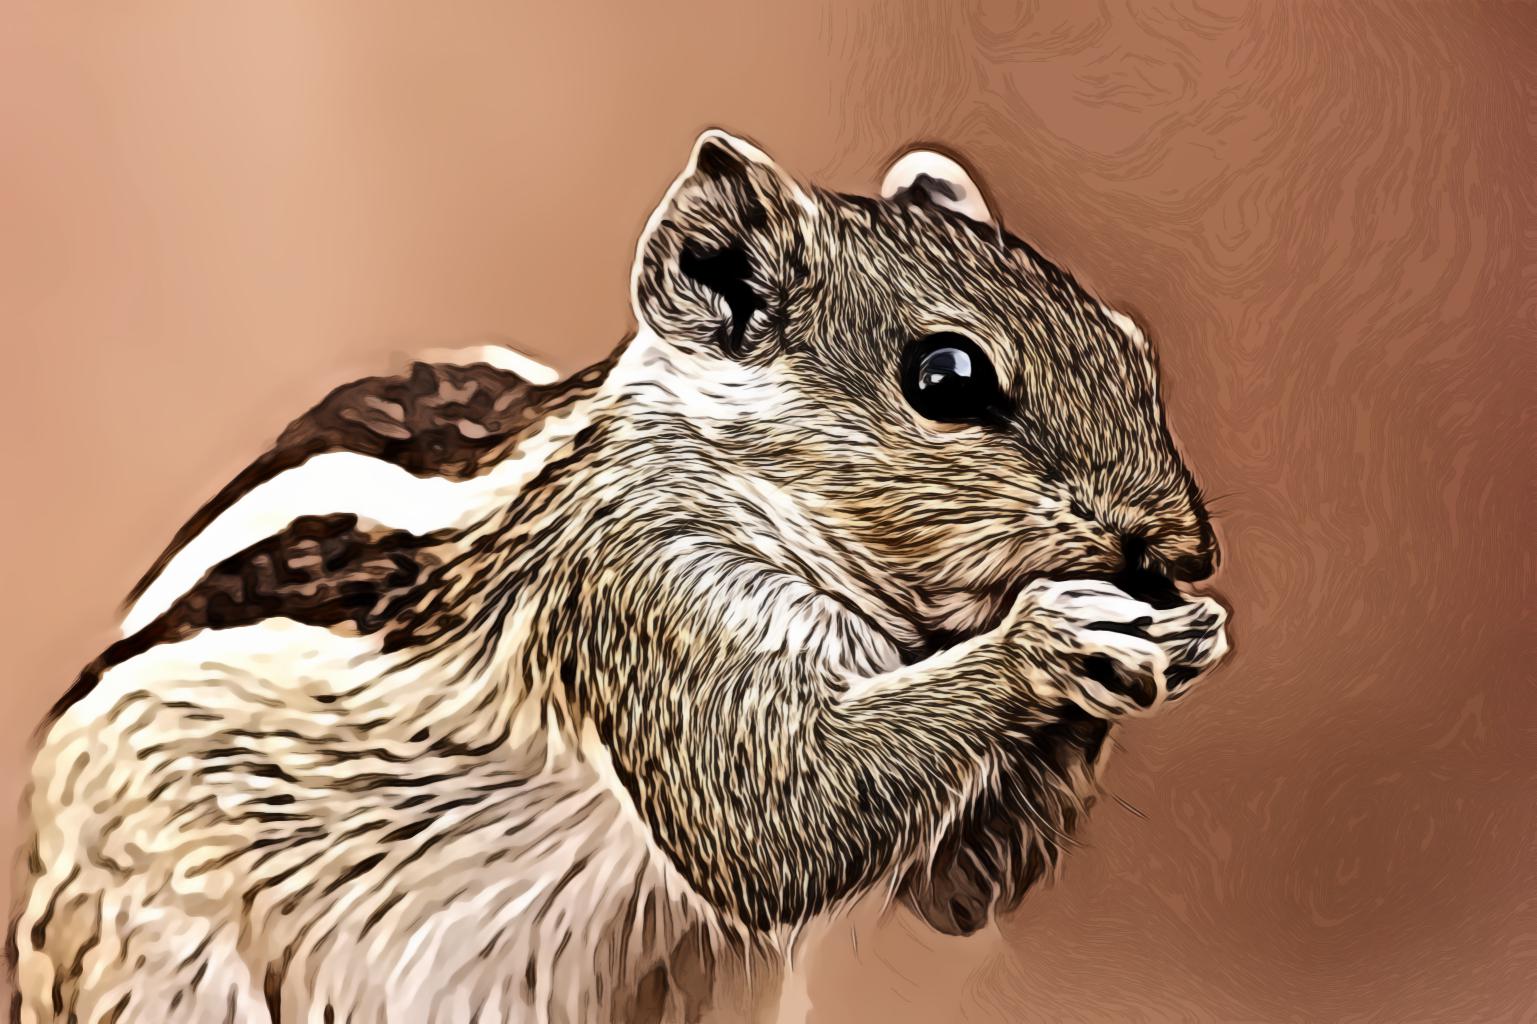 Brown and Gray Squirrel